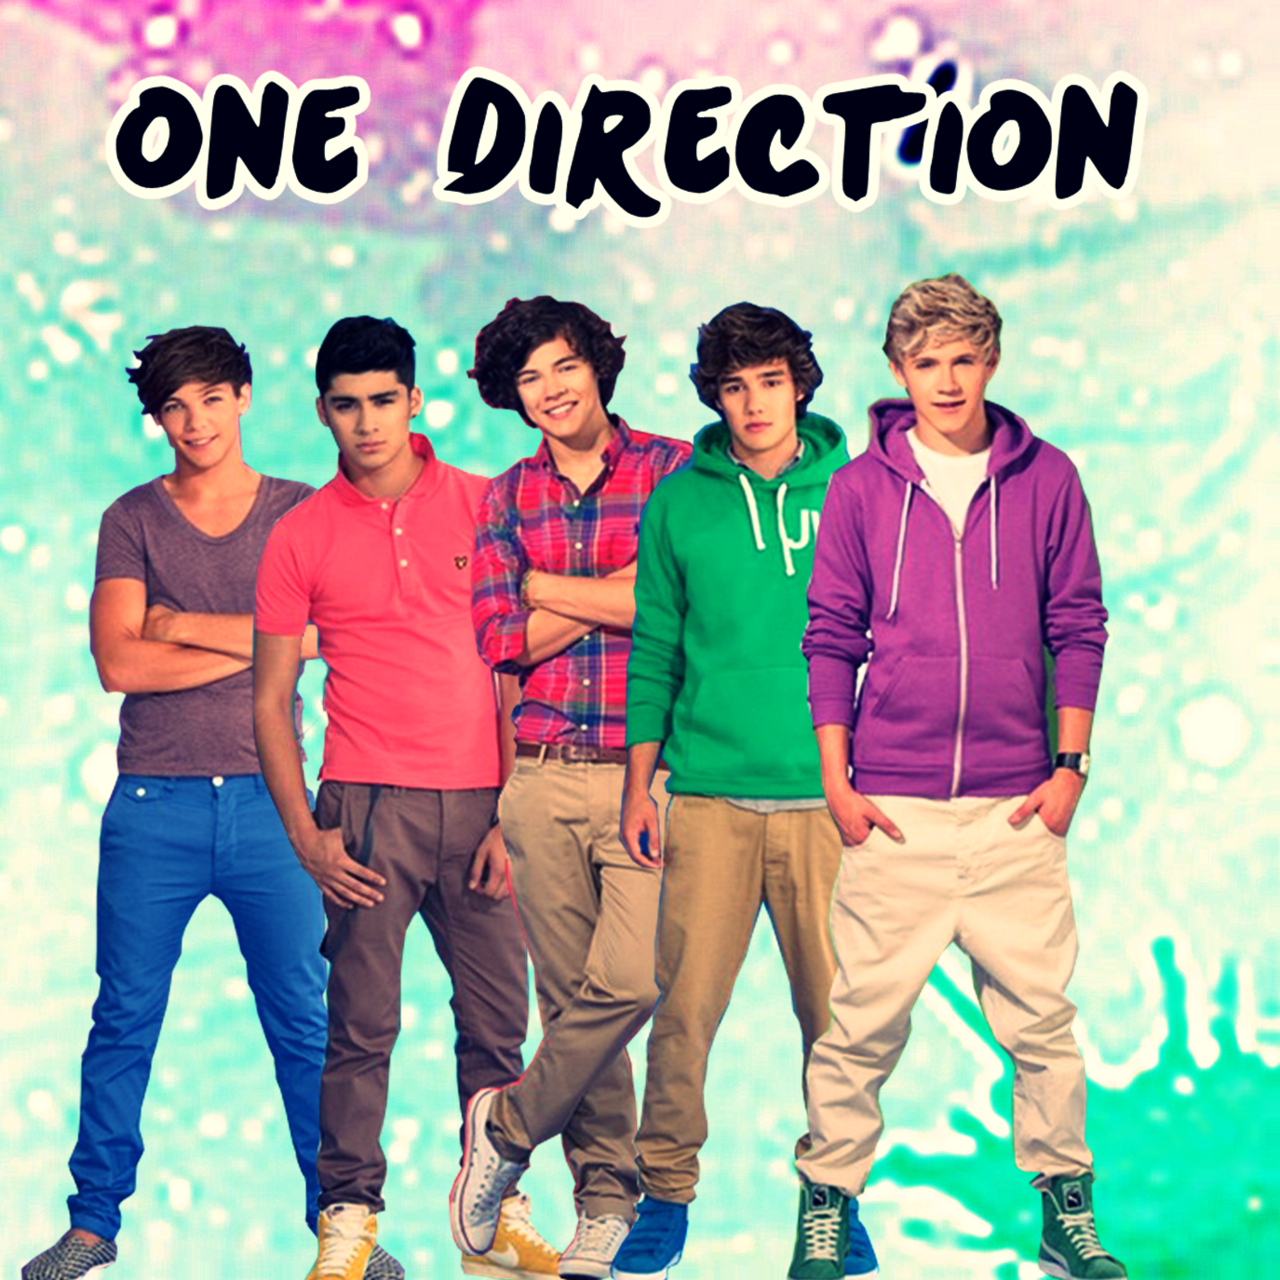 Free download One Direction Wallpaper Photo Album Music 21476 Wallpaper [1280x1280] for your Desktop, Mobile & Tablet. Explore One Direction HD Wallpaper. One Direction iPhone Wallpaper, Image of One